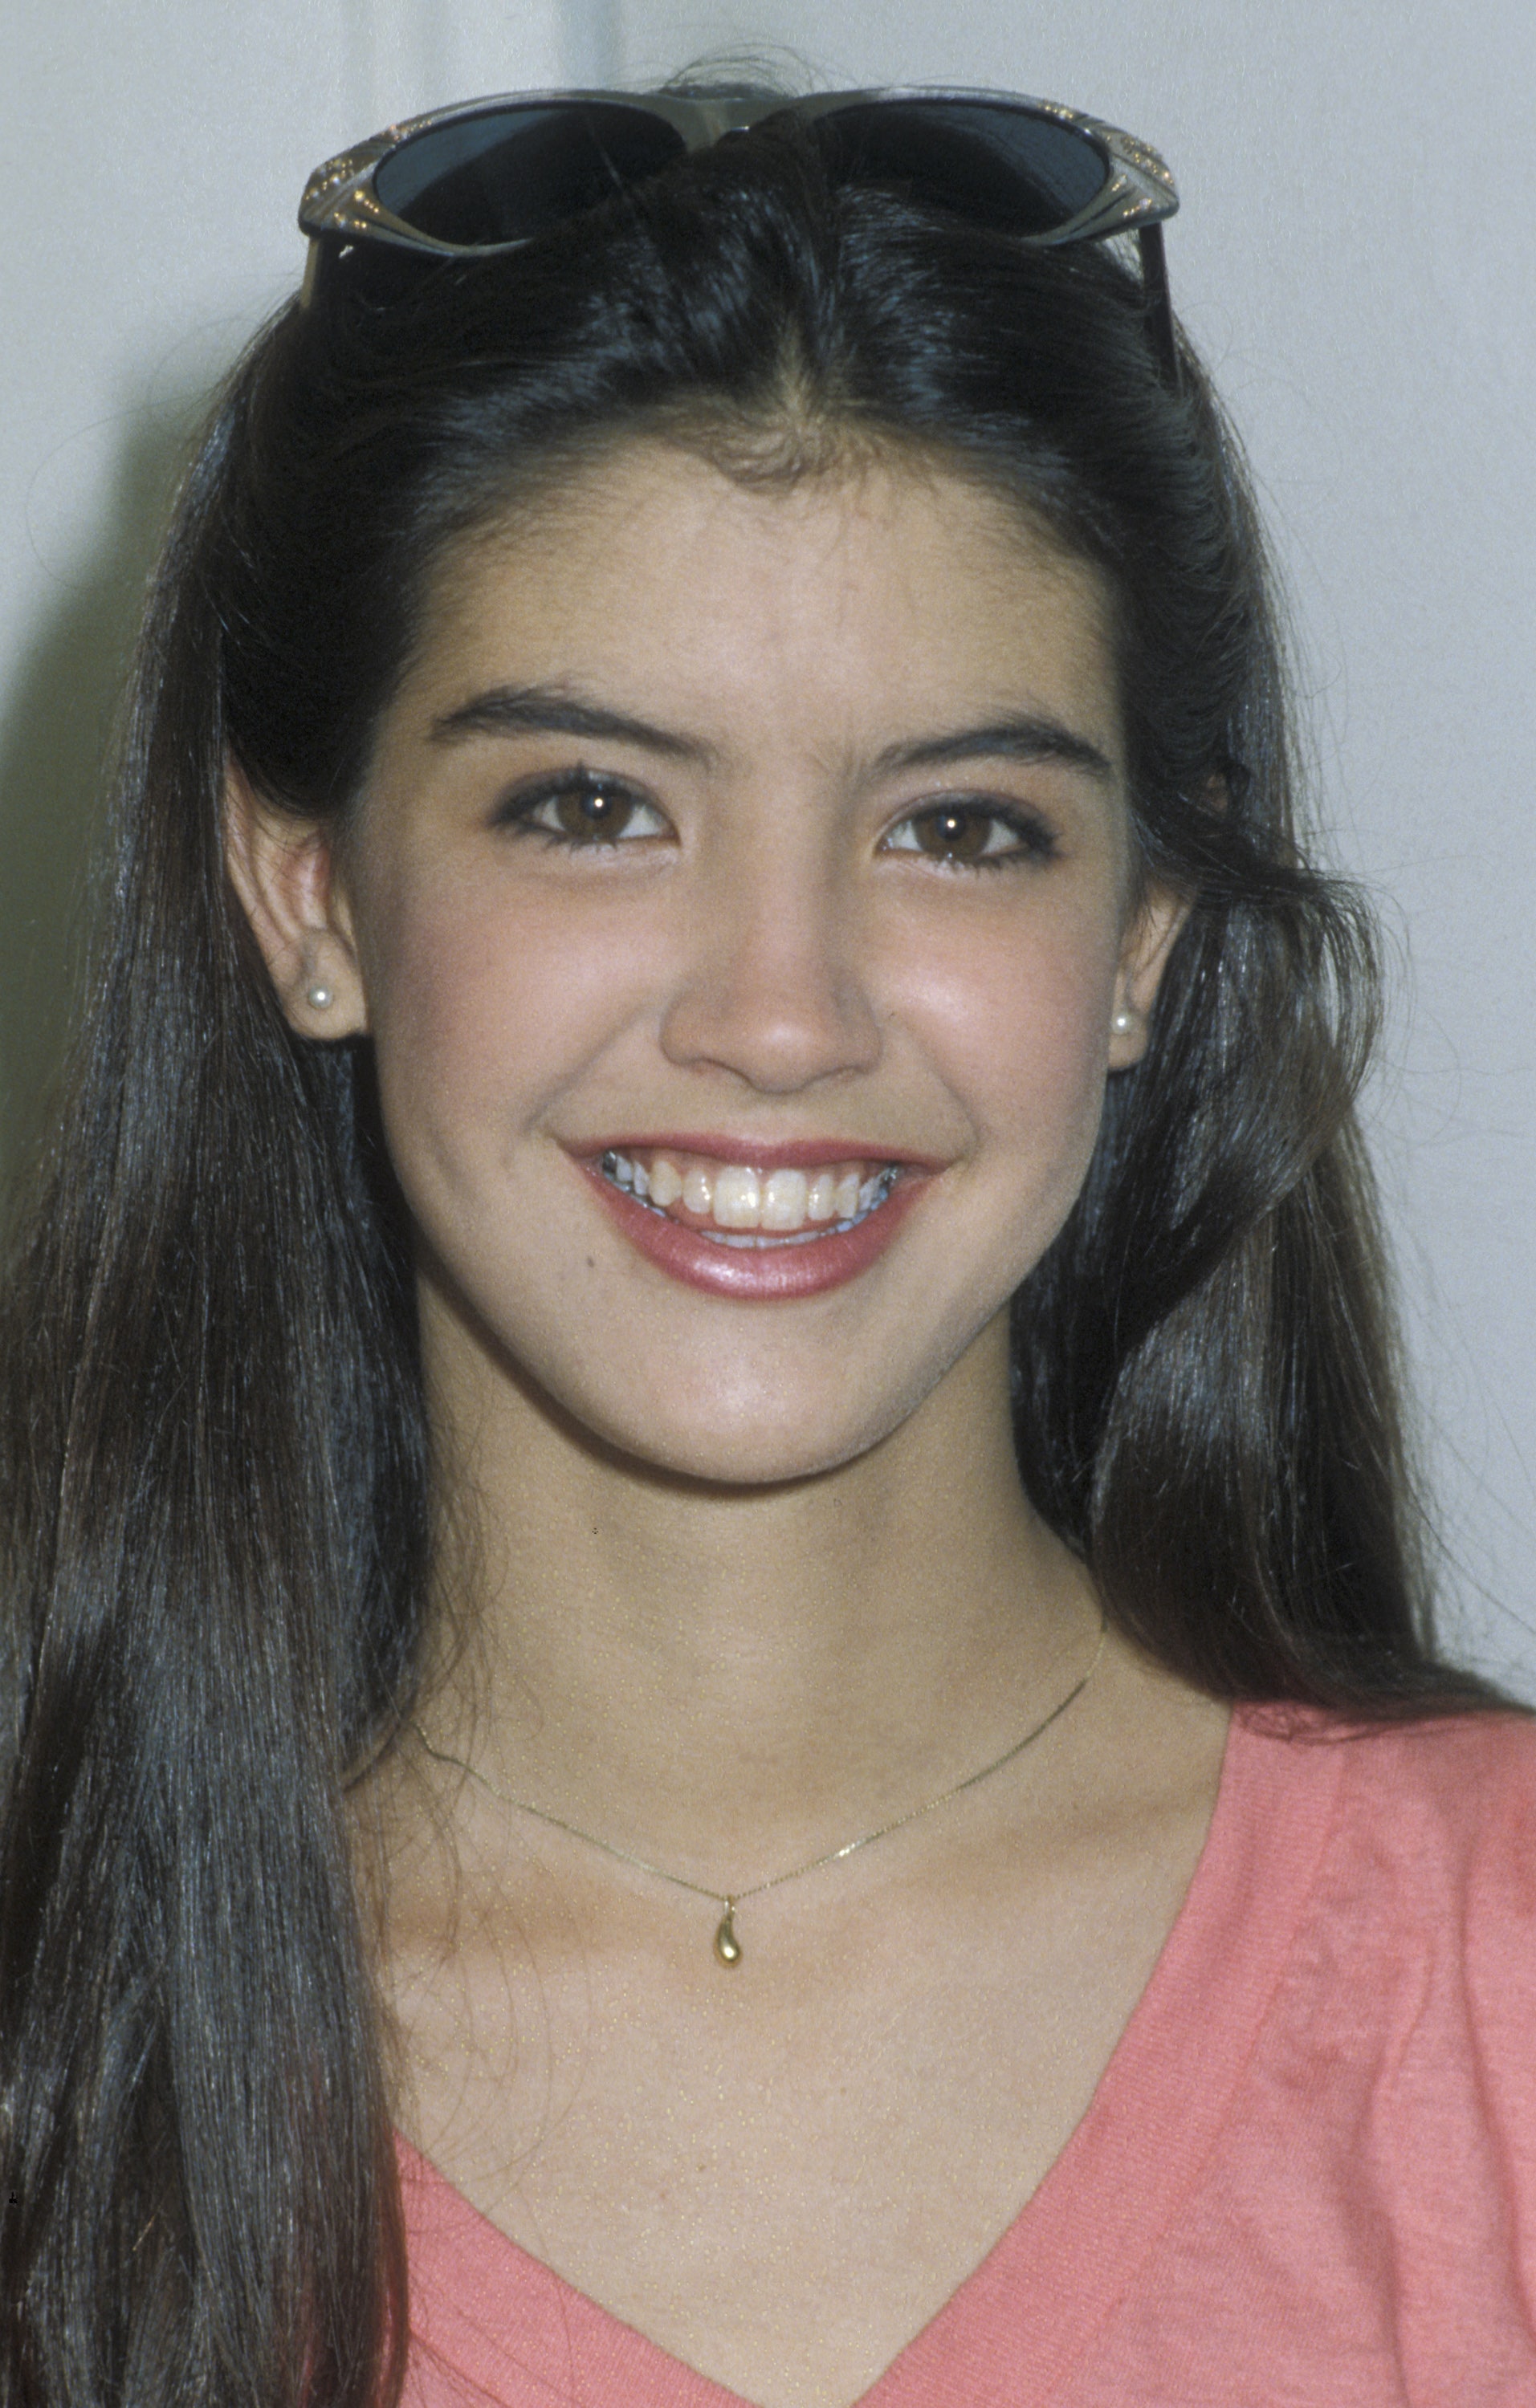 Phoebe Cates smiling with sunglasses on her head